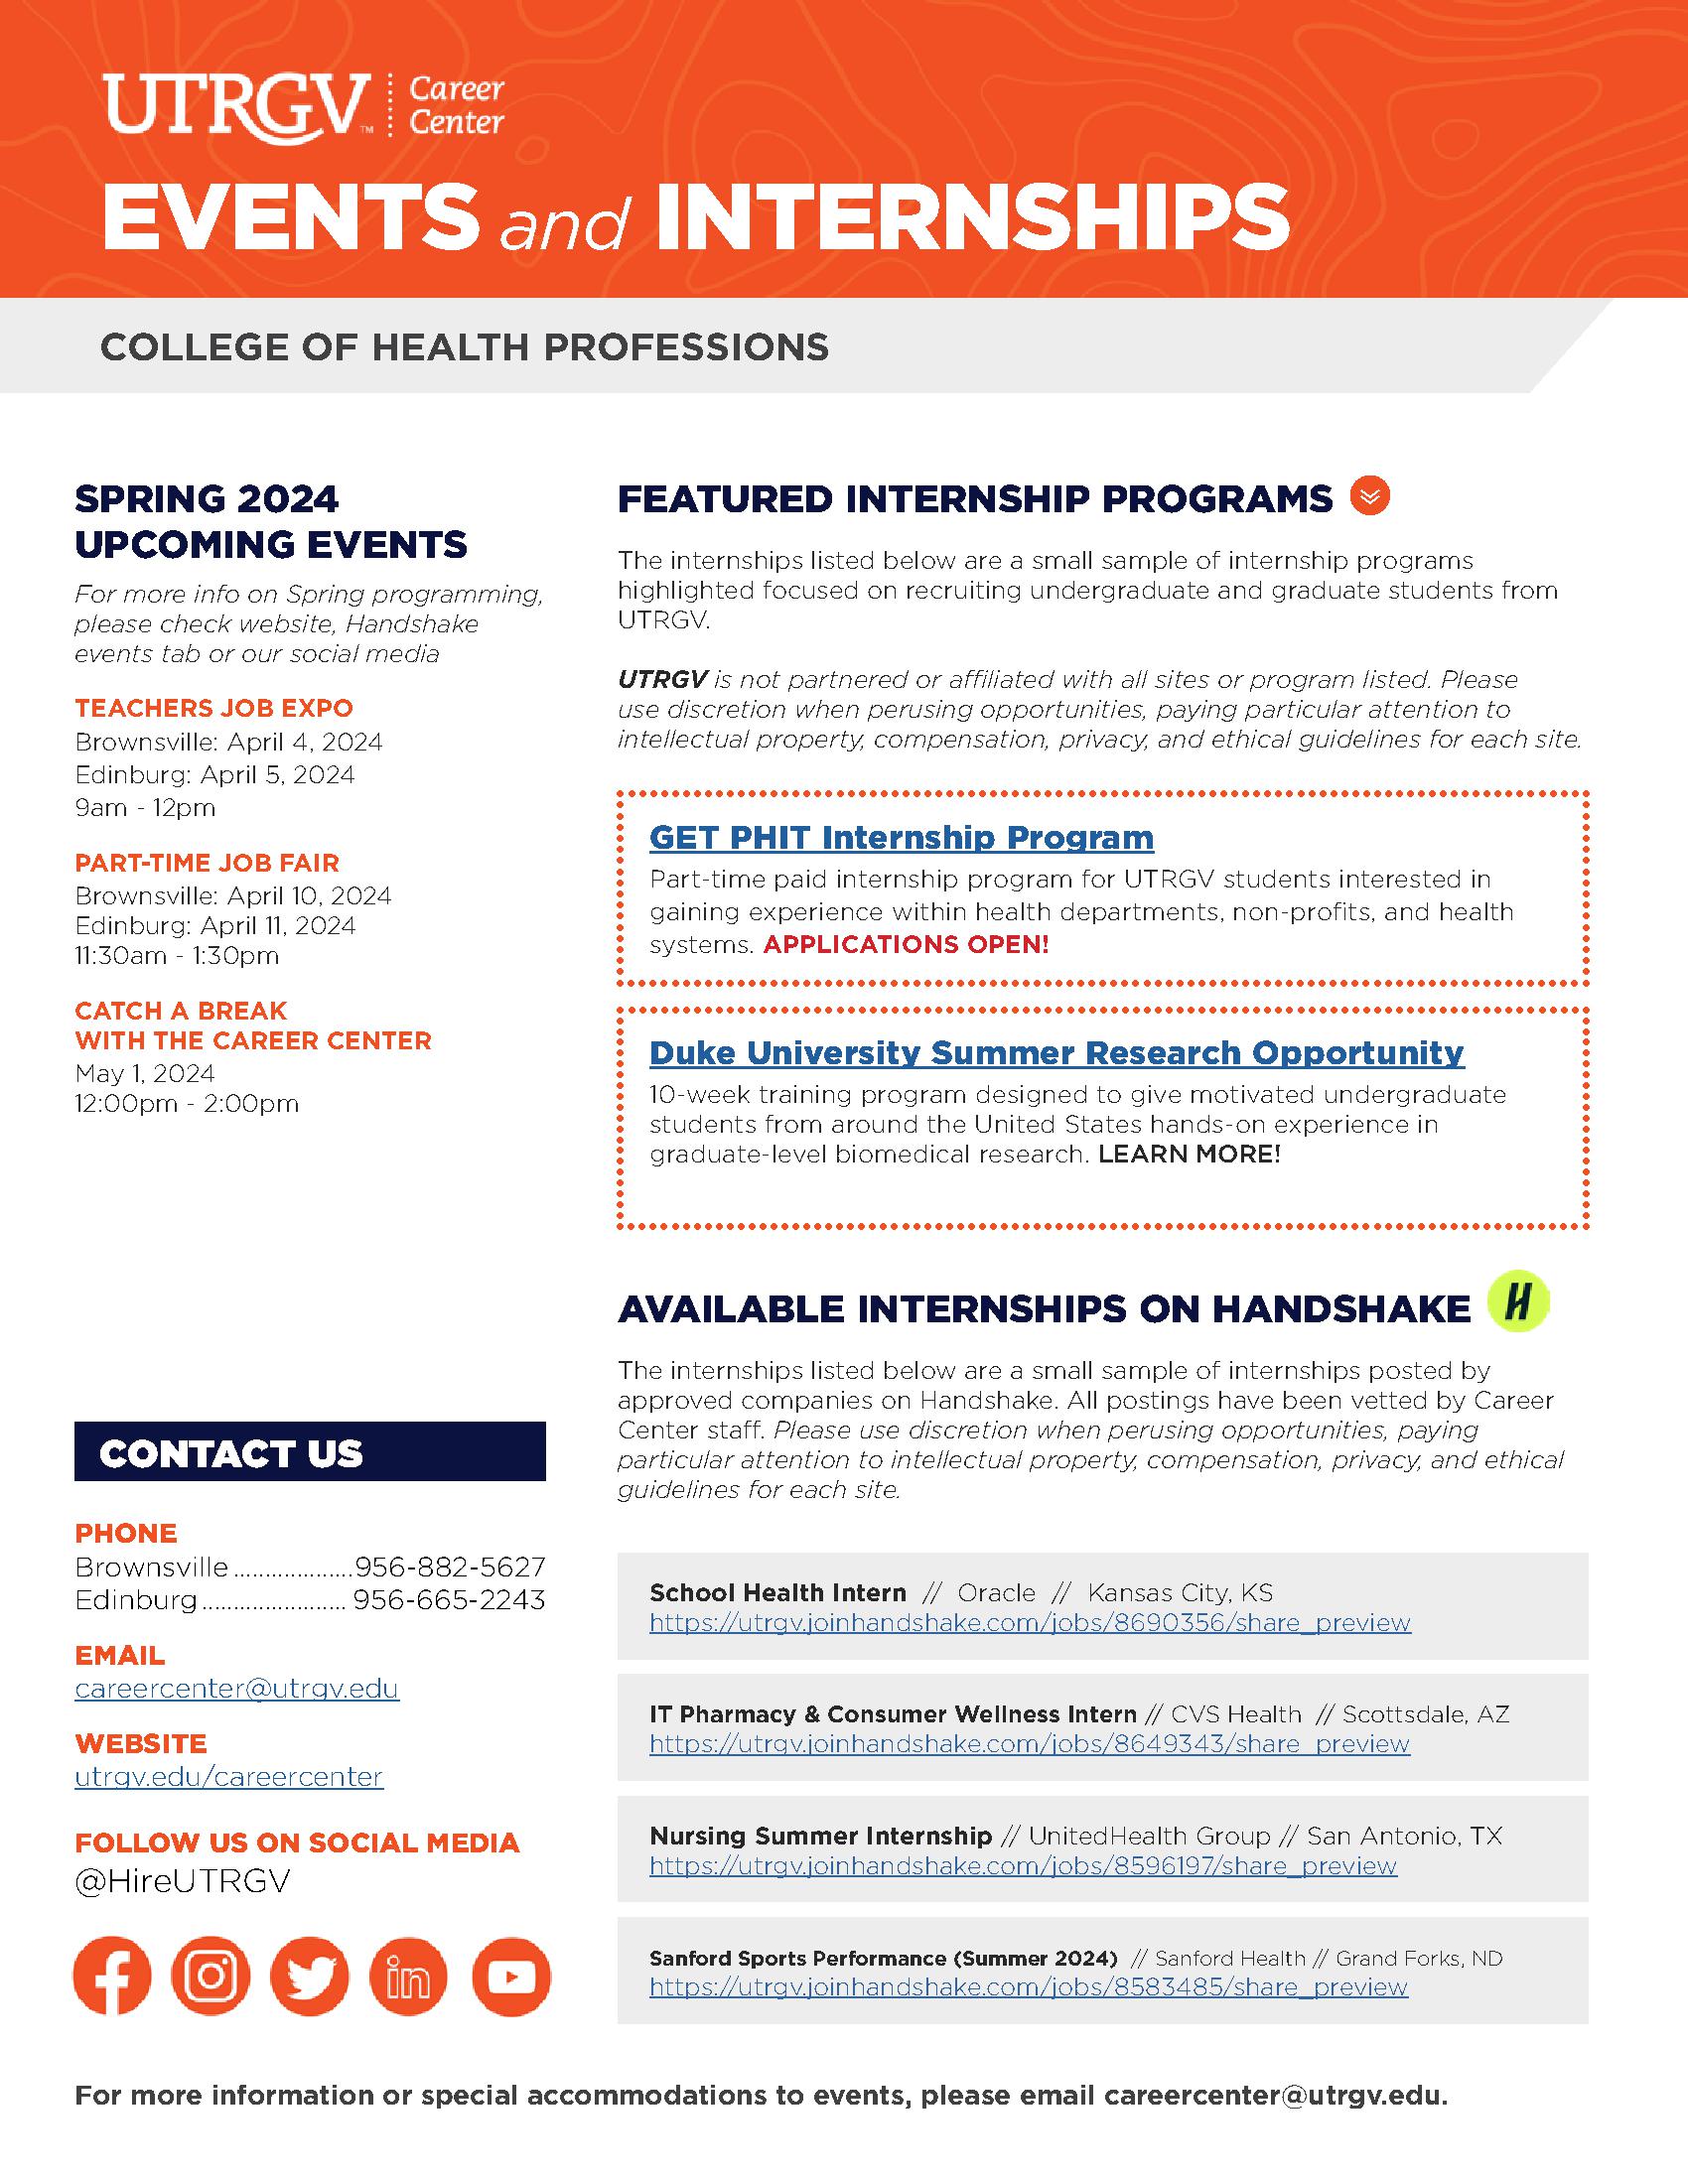 faculty-events-opportunities-onesheet_march-4_chp-1_49676386_1.jpg